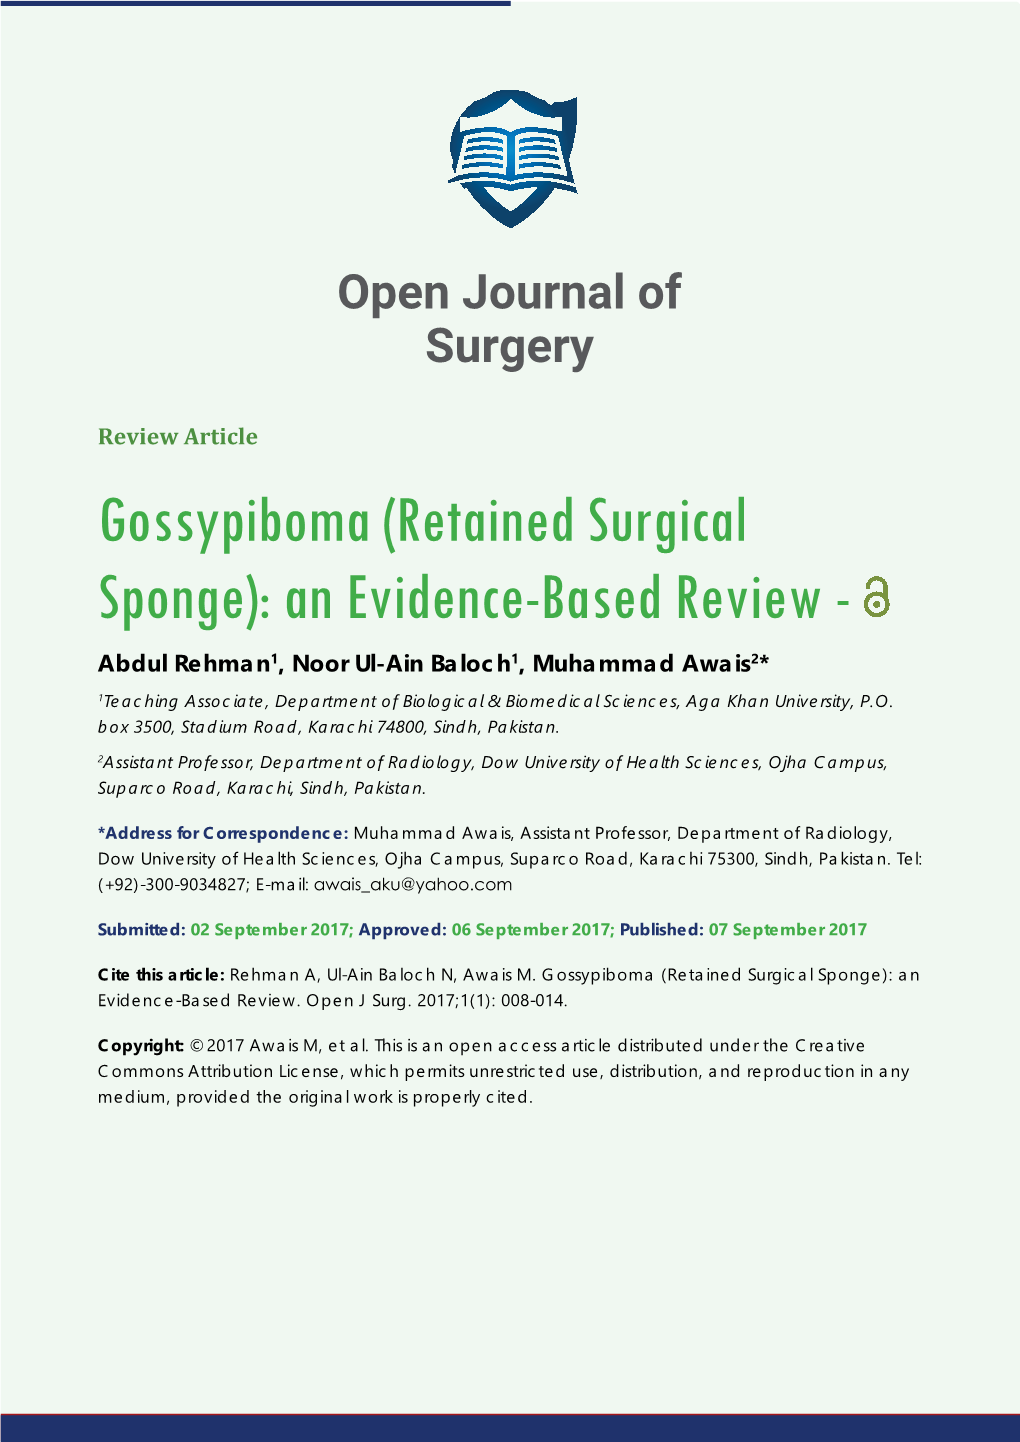 Gossypiboma (Retained Surgical Sponge): an Evidence-Based Review